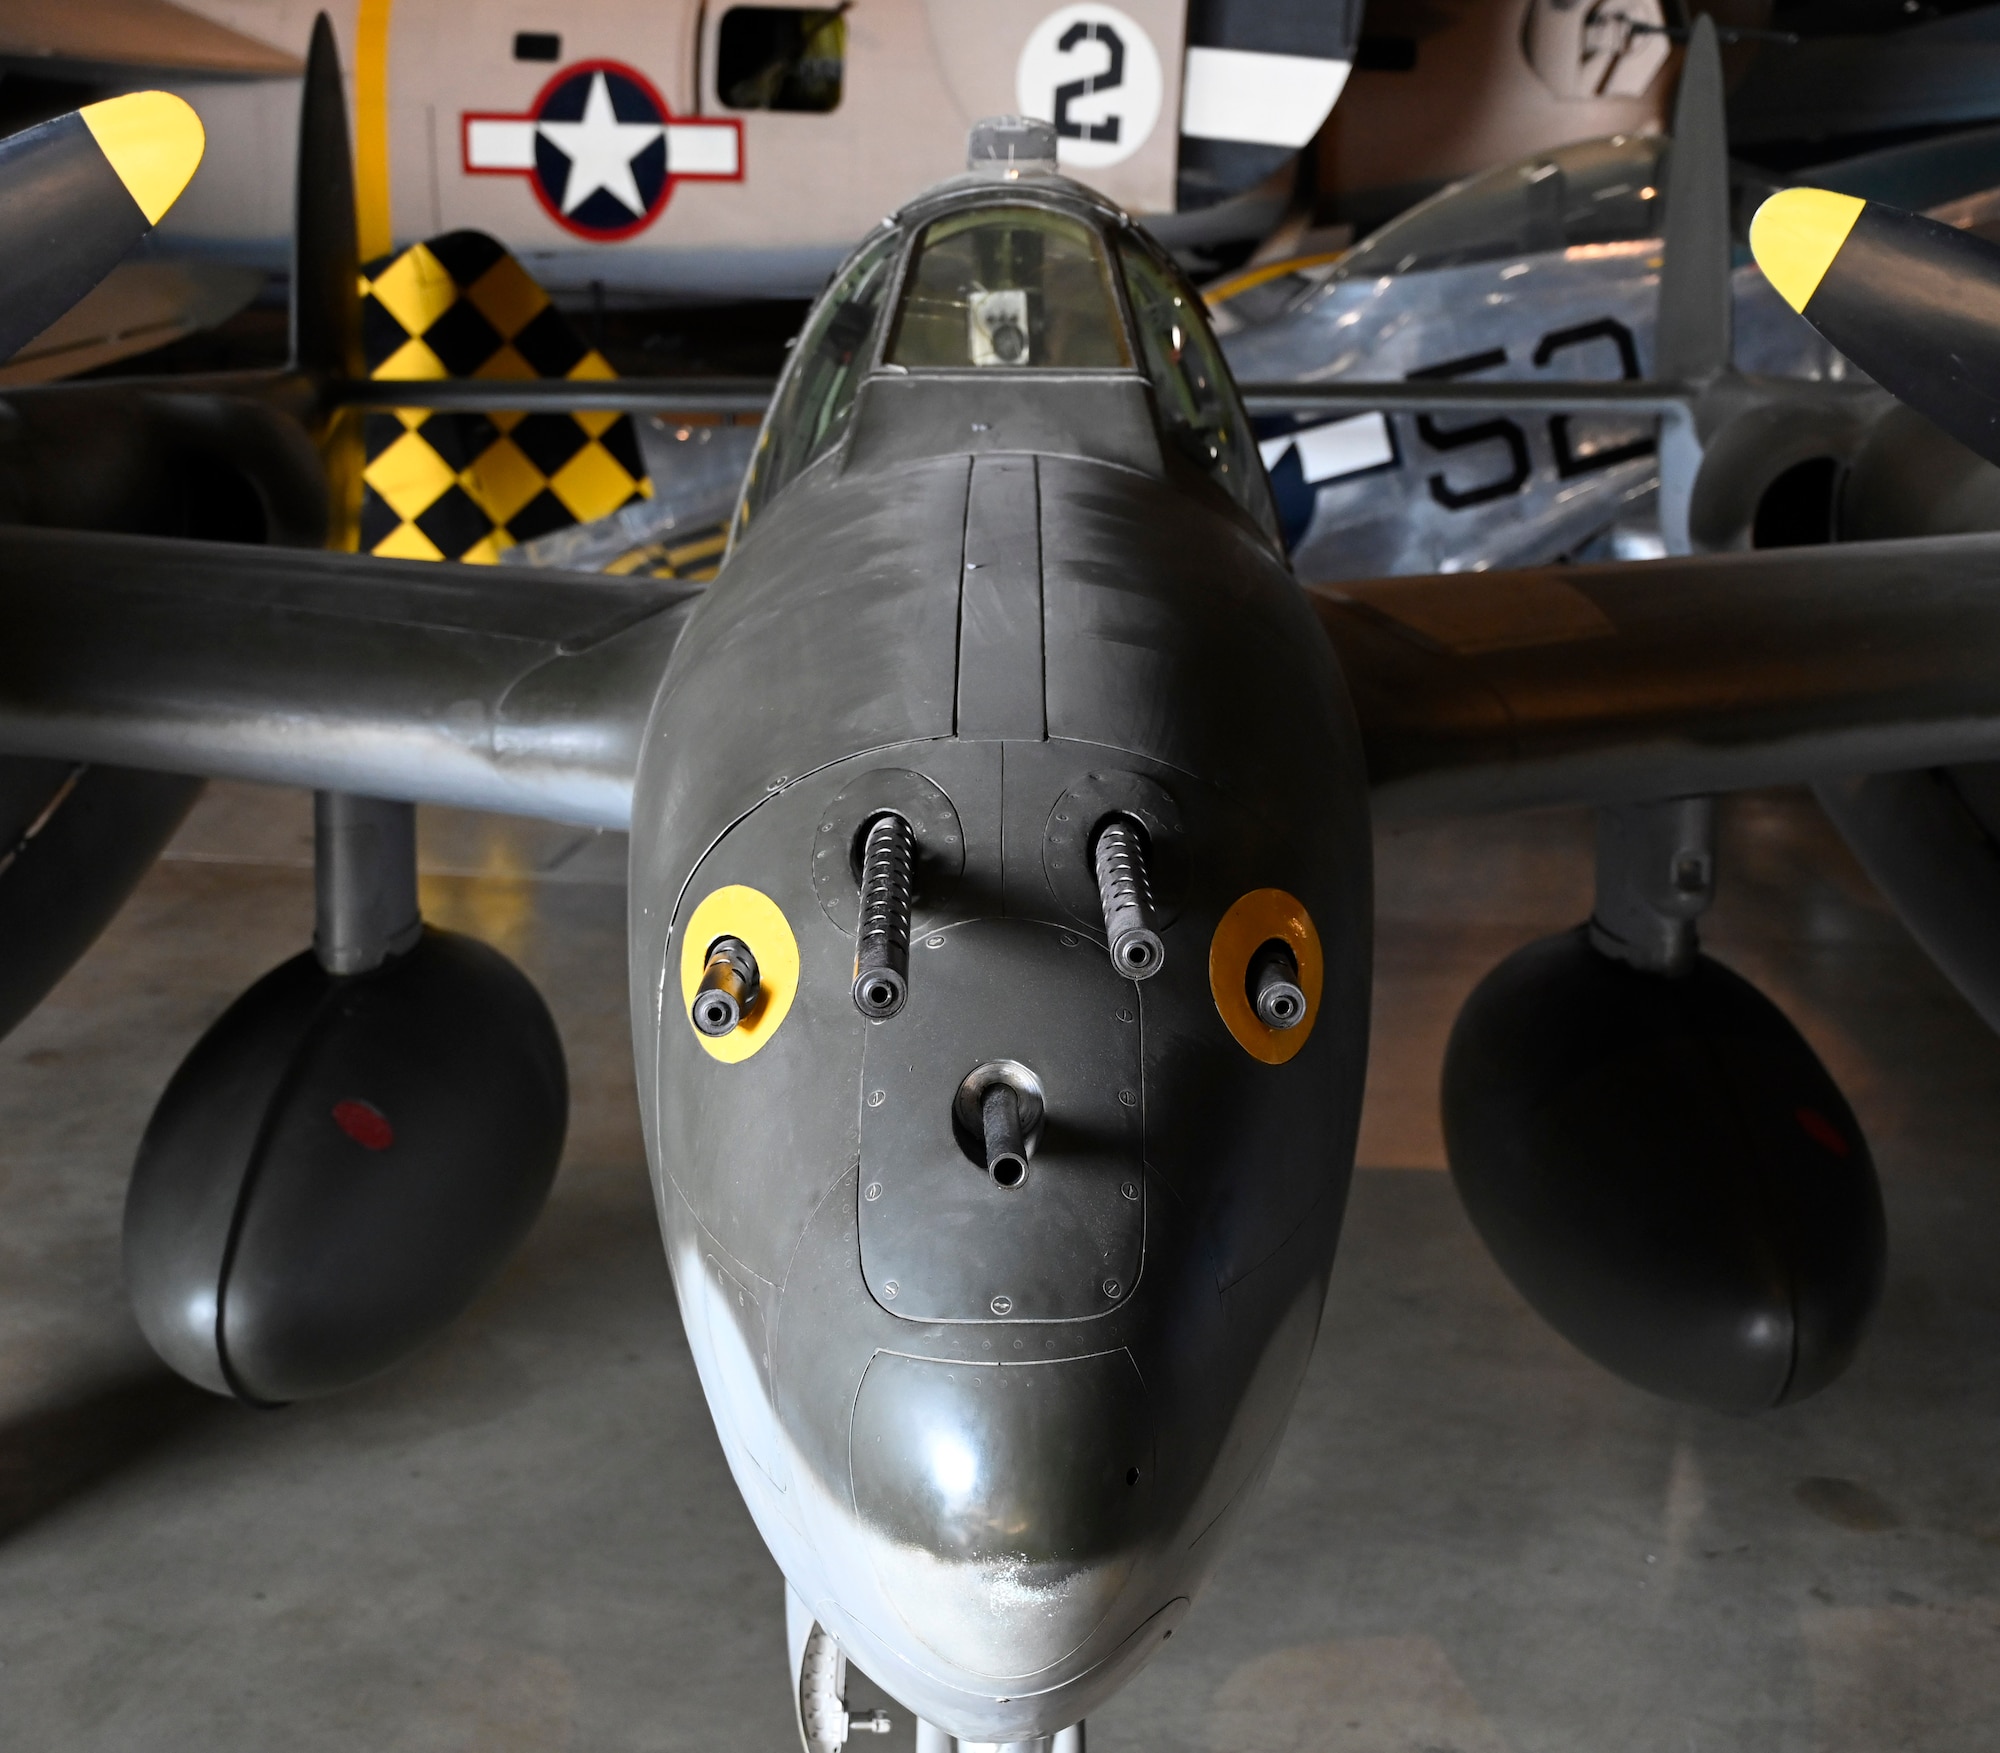 Lockheed P-38L Lightning on display in the World War II Gallery of the National Museum of the U.S. Air Force.